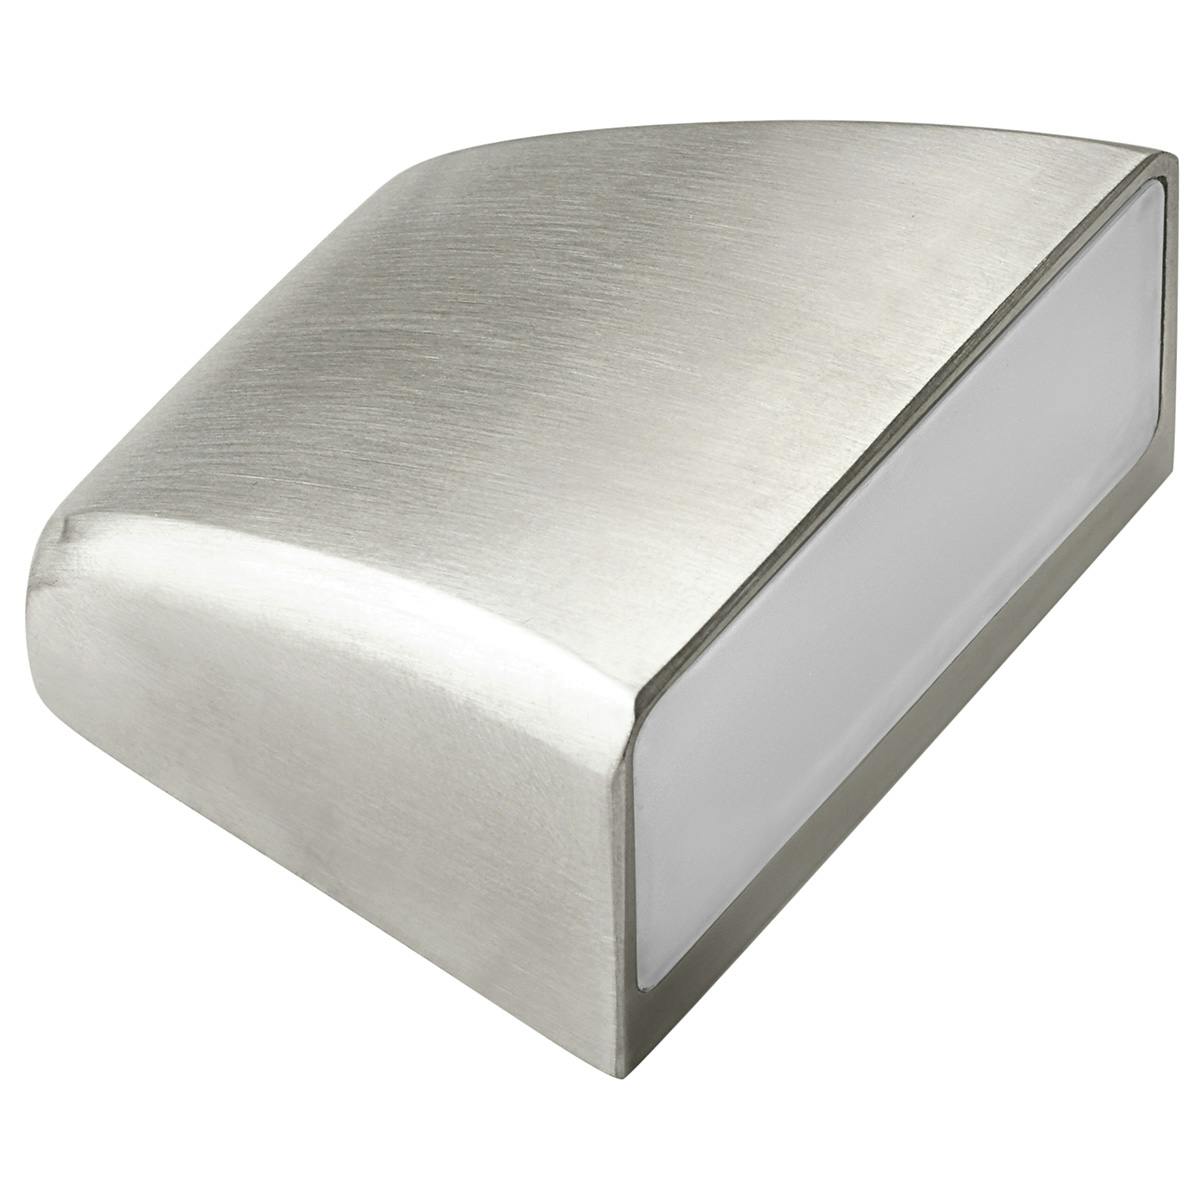 Mini Side Fire Accessory Stainless Steel on a white background